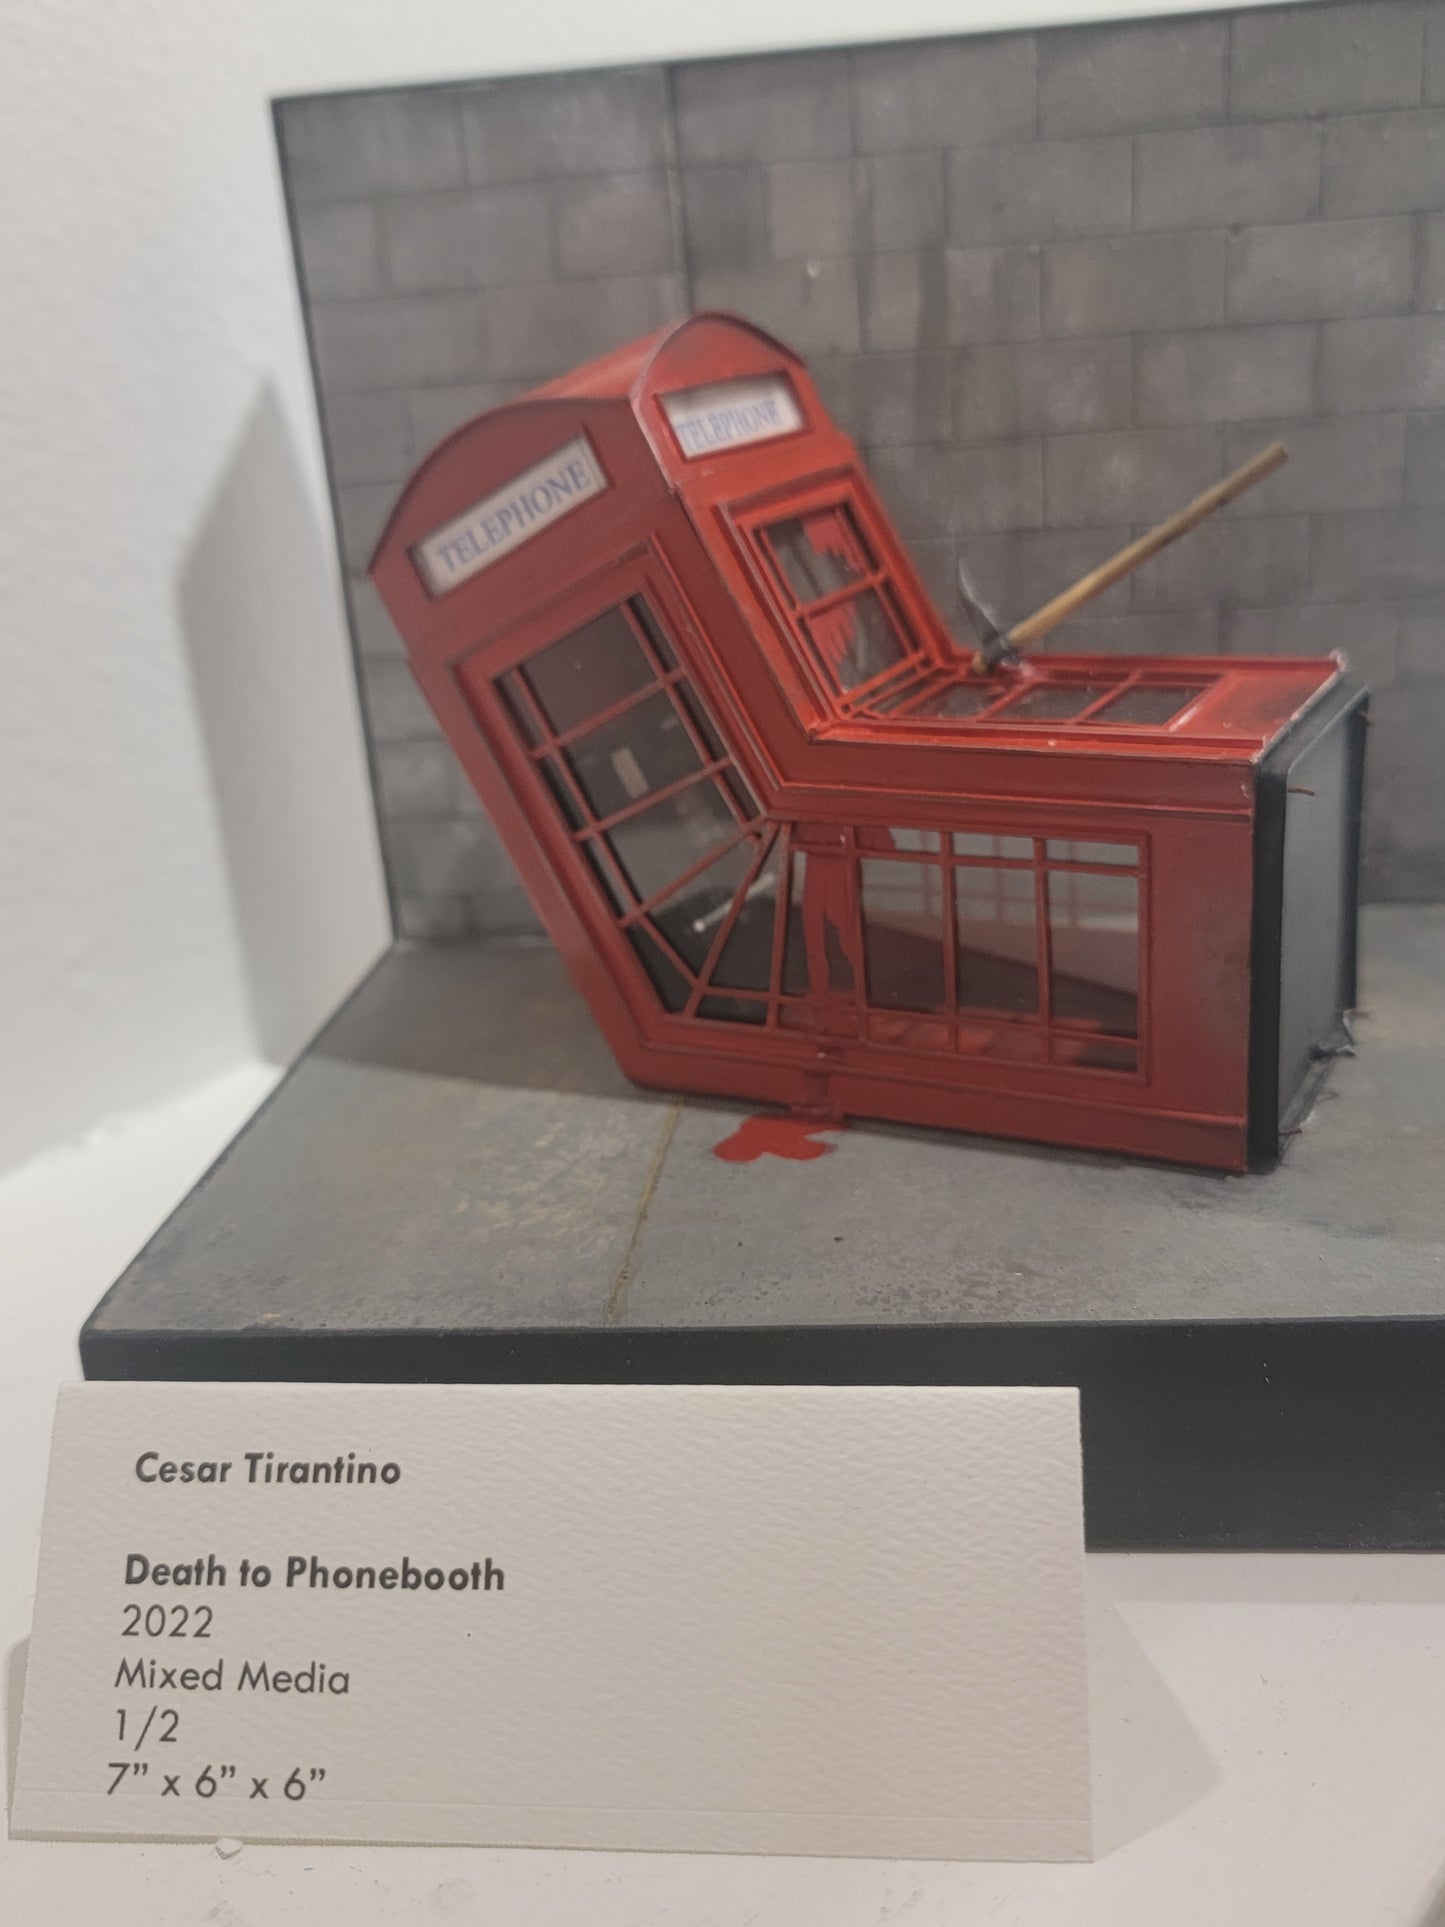 Recreation of Banksy's Death to Phonebooth - 2022